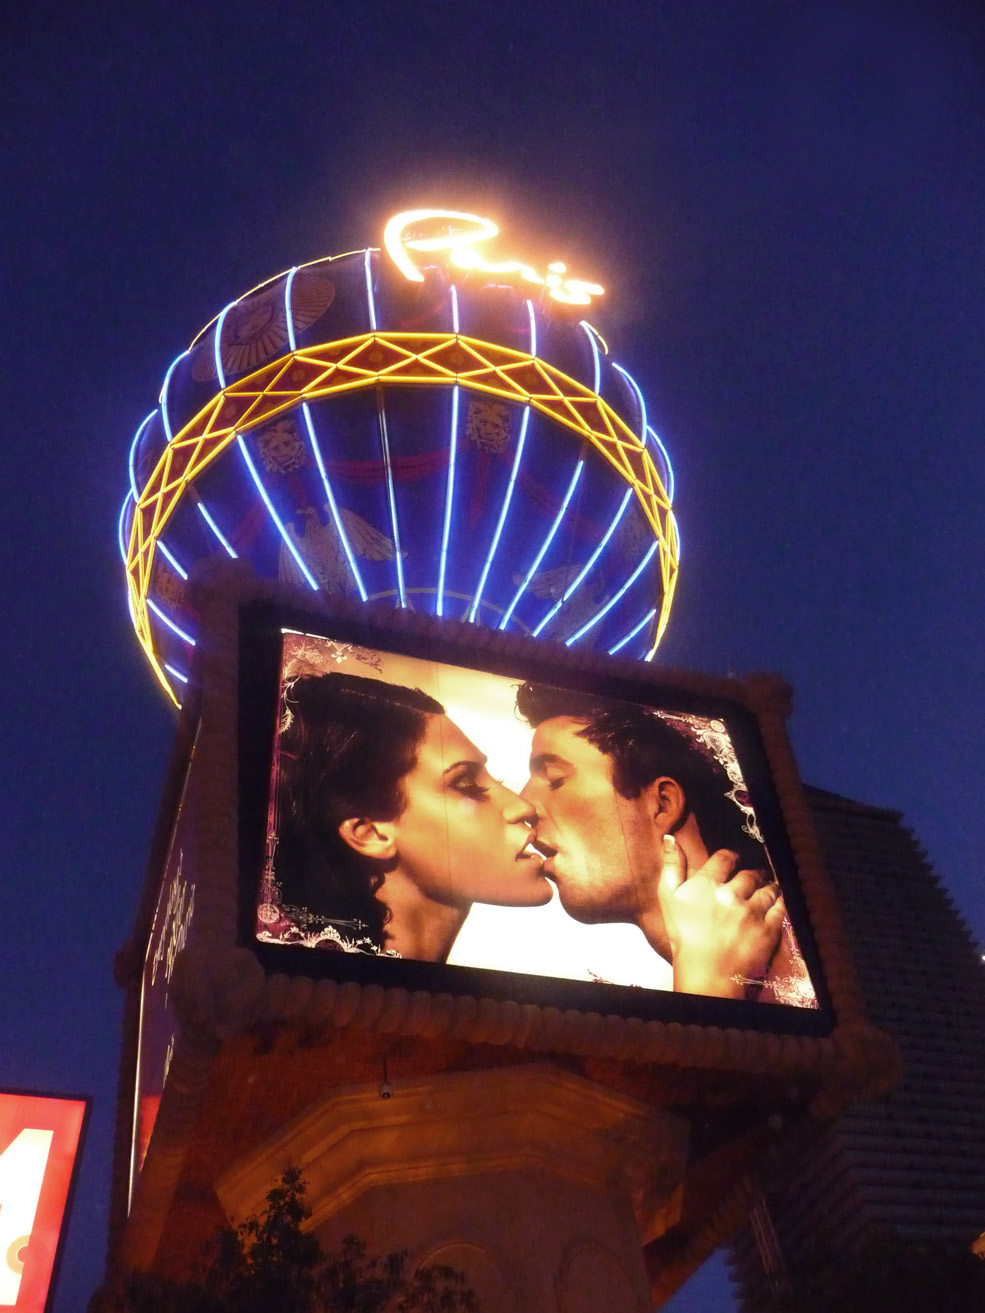 Beneath the balloon is this provocative billboard of a sexy couple kissing.